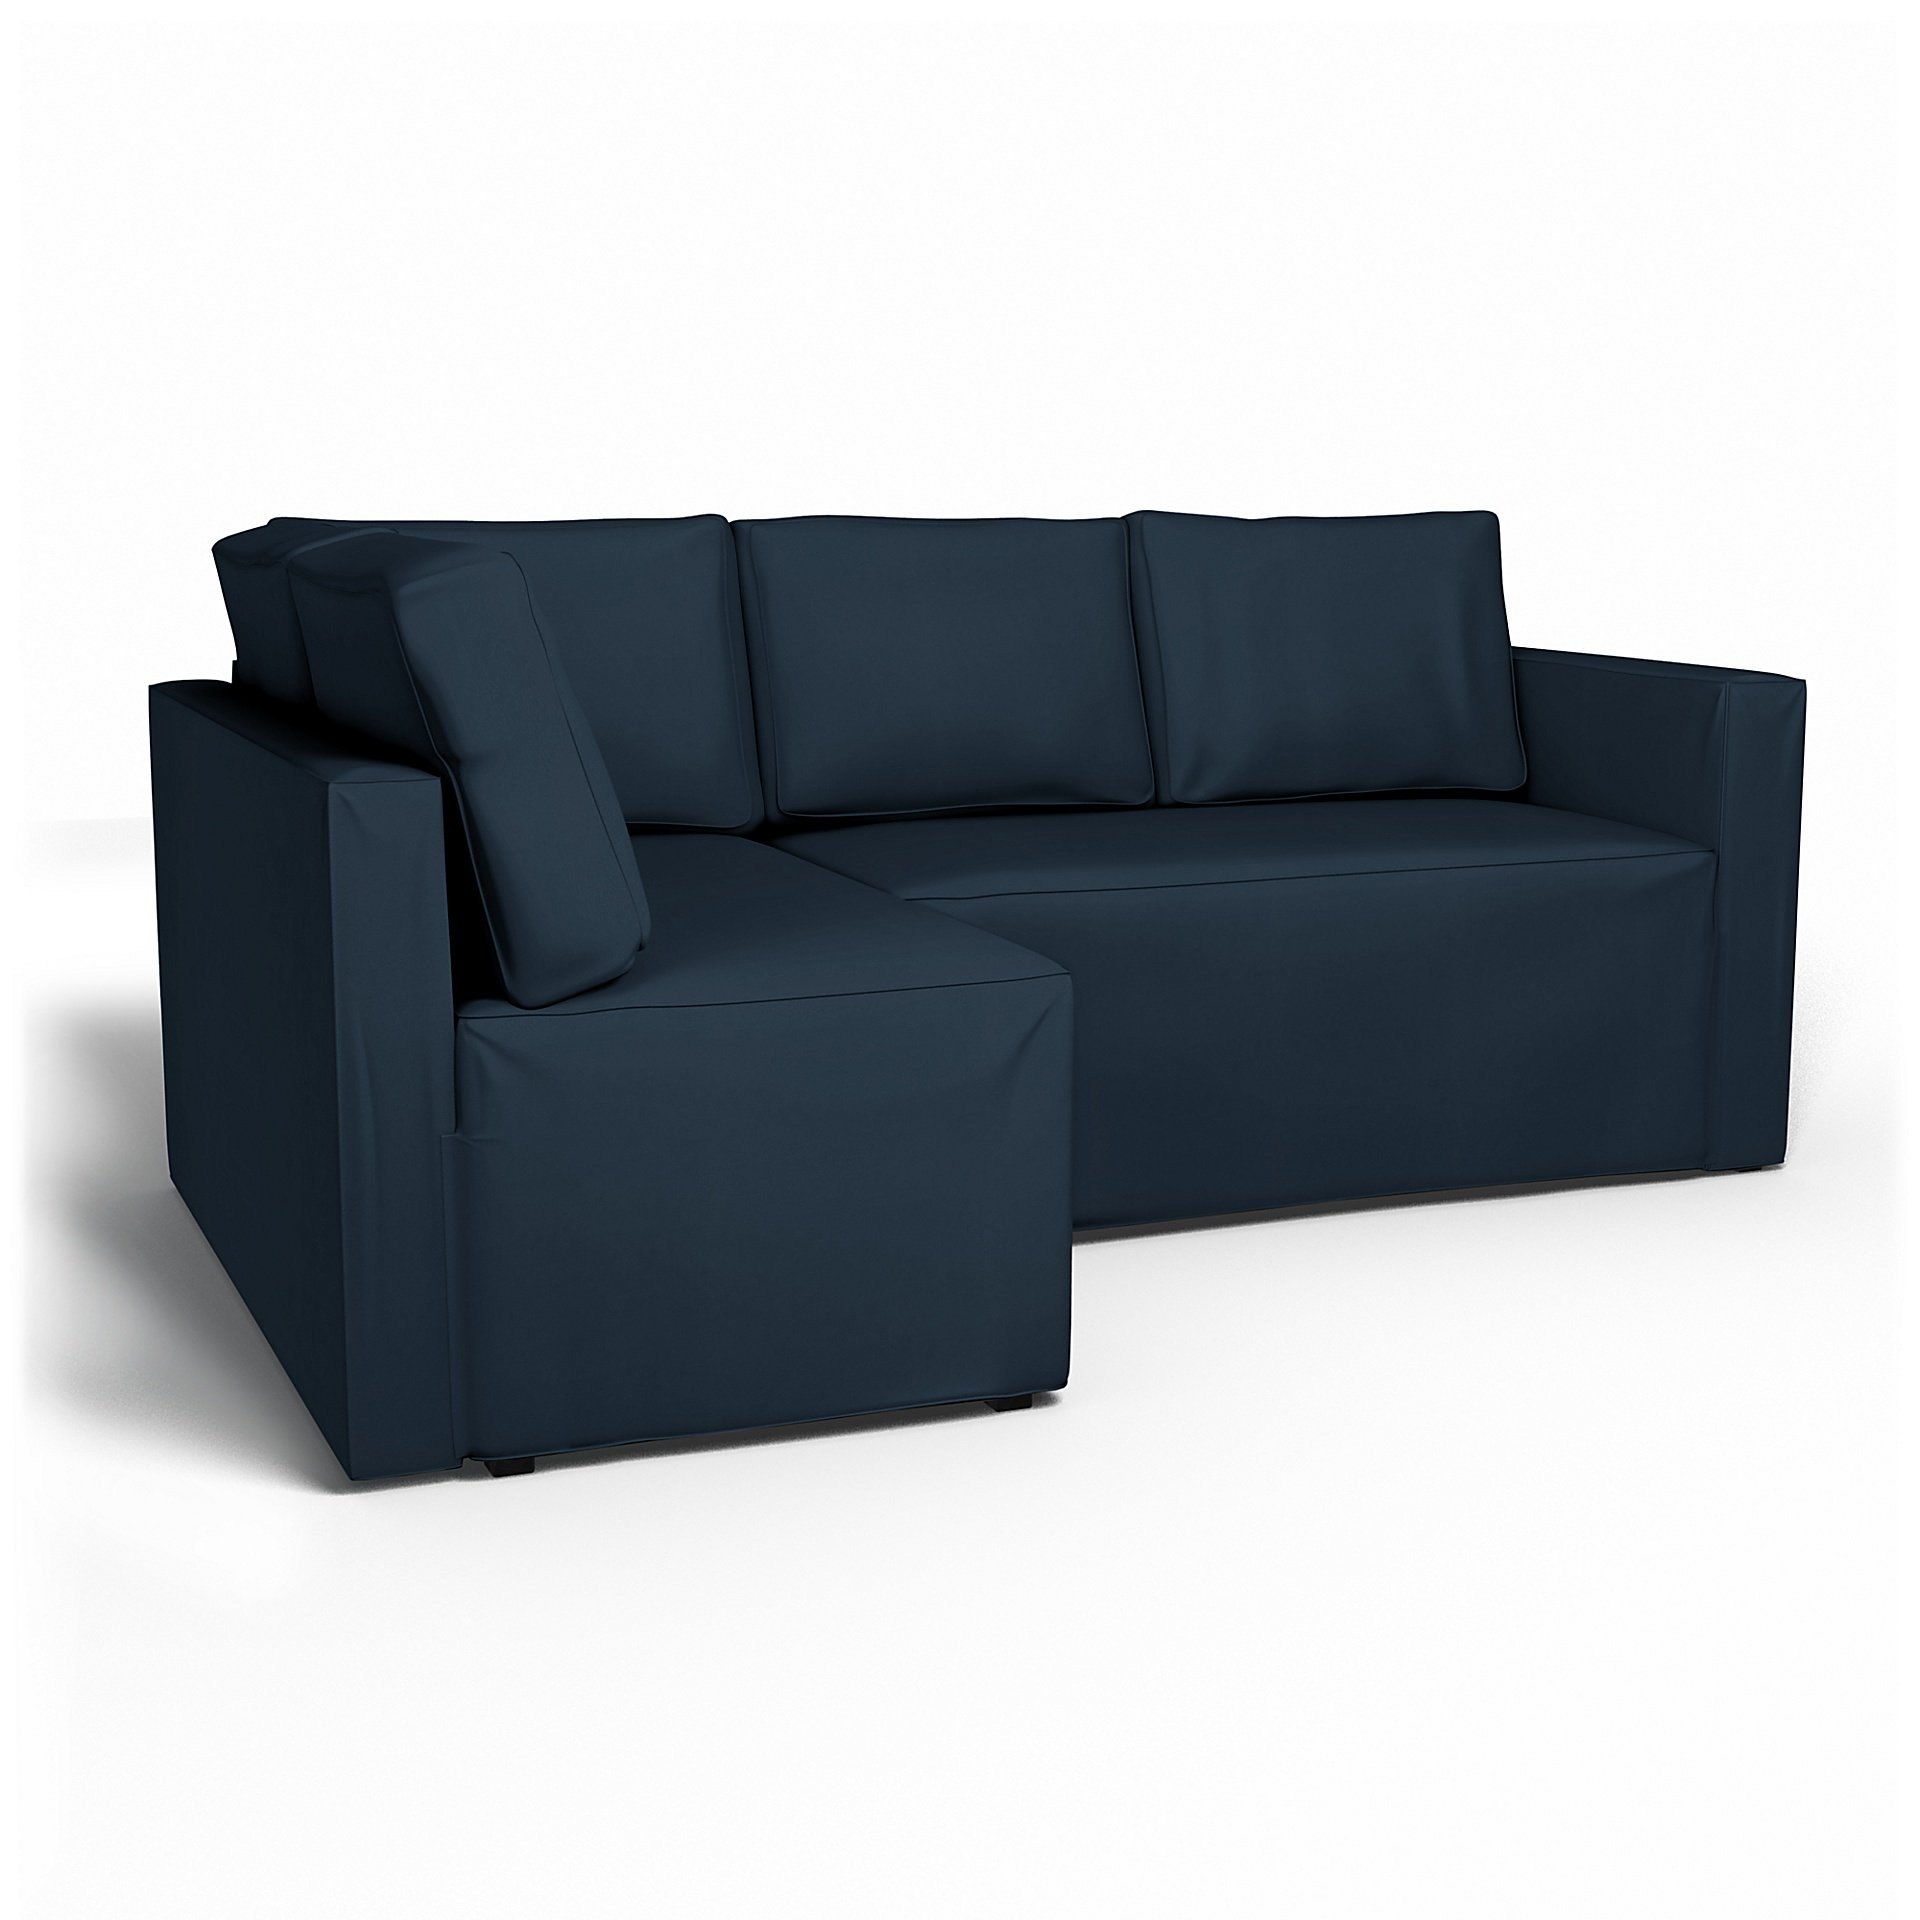 IKEA - Fagelbo Sofa Bed with Left Chaise Cover, Navy Blue, Cotton - Bemz